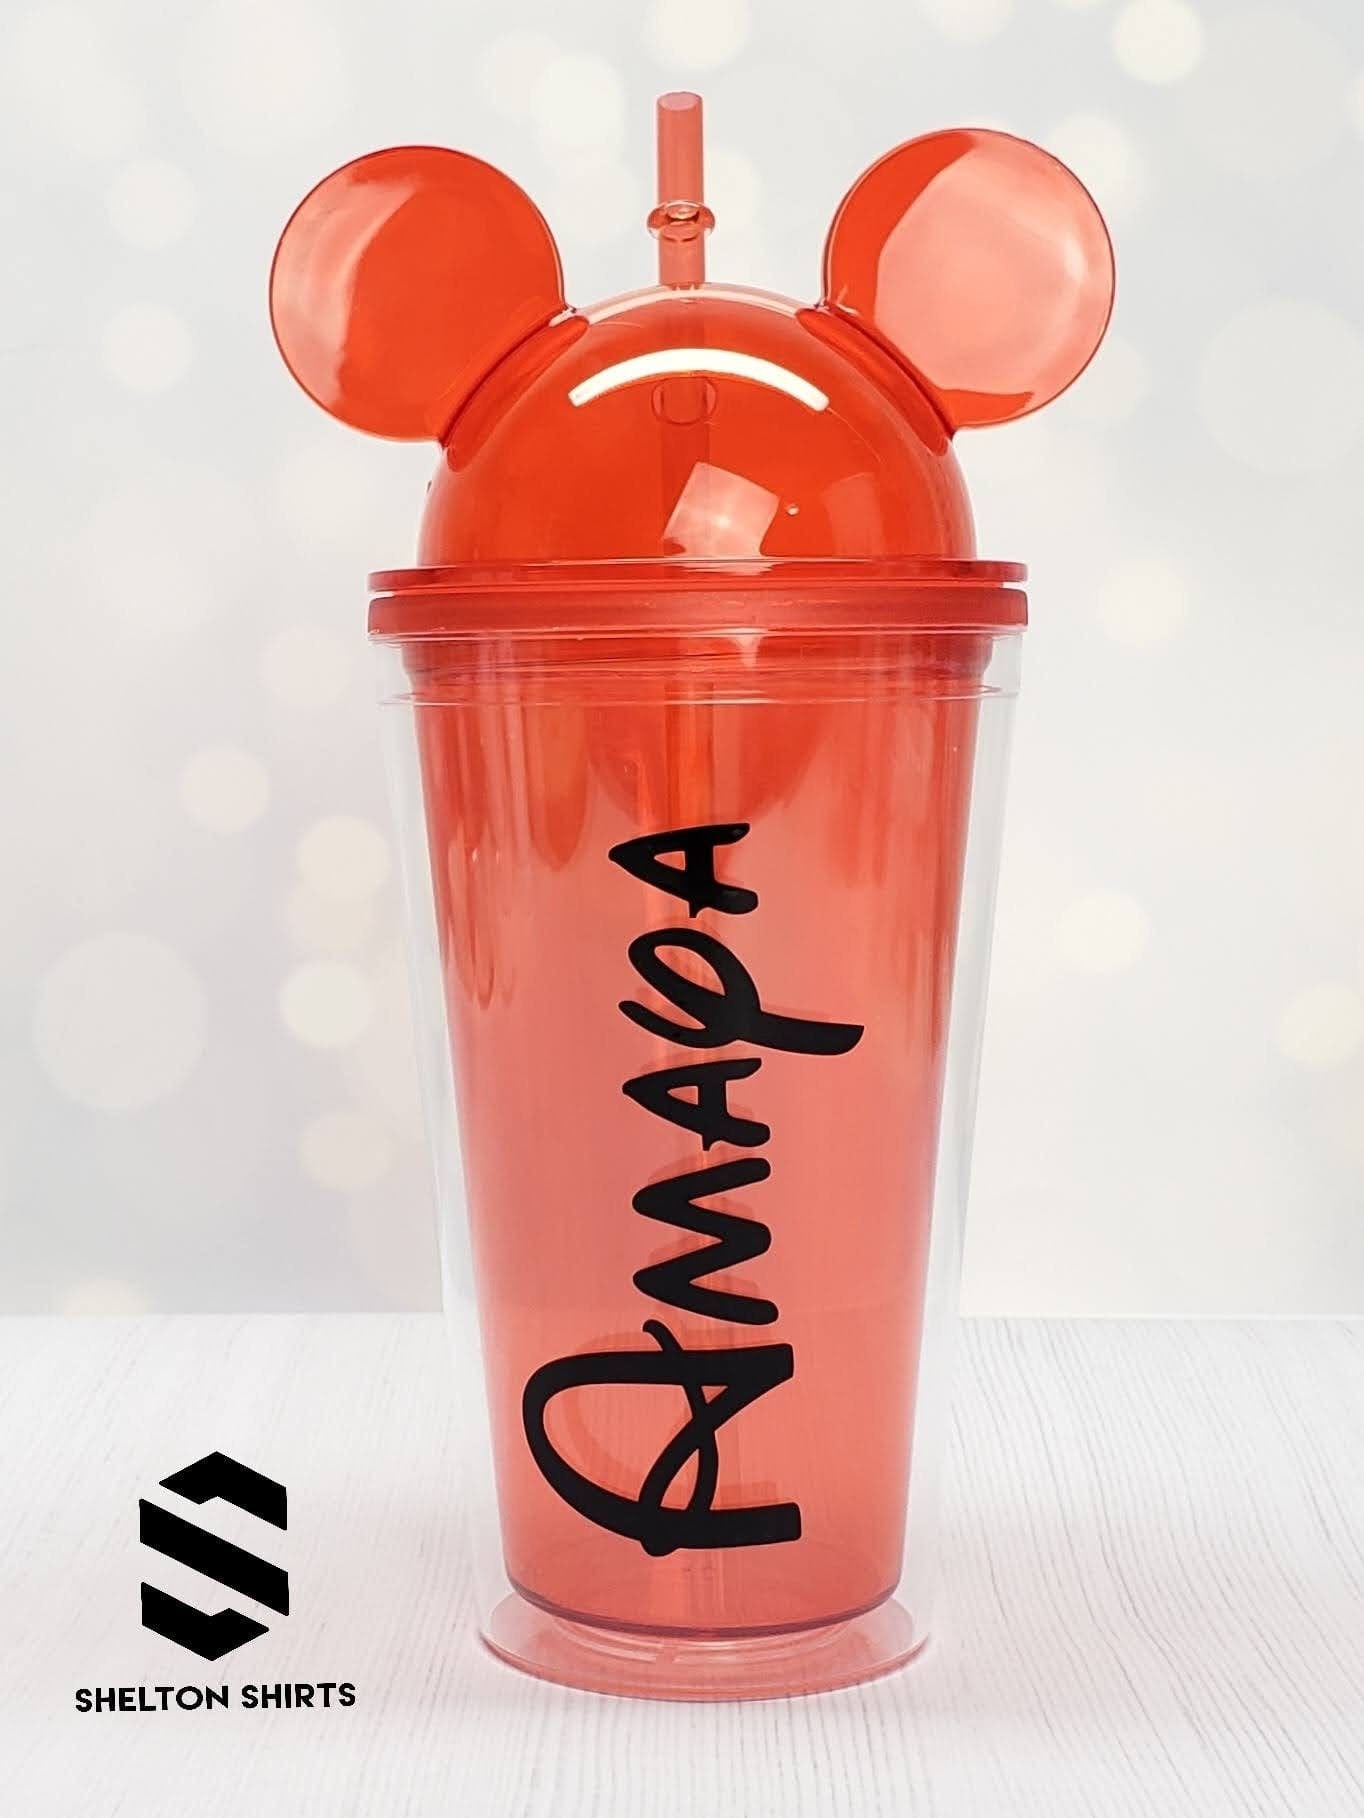 Personalized 24 oz Acrylic Tumbler with Straw - The White Invite